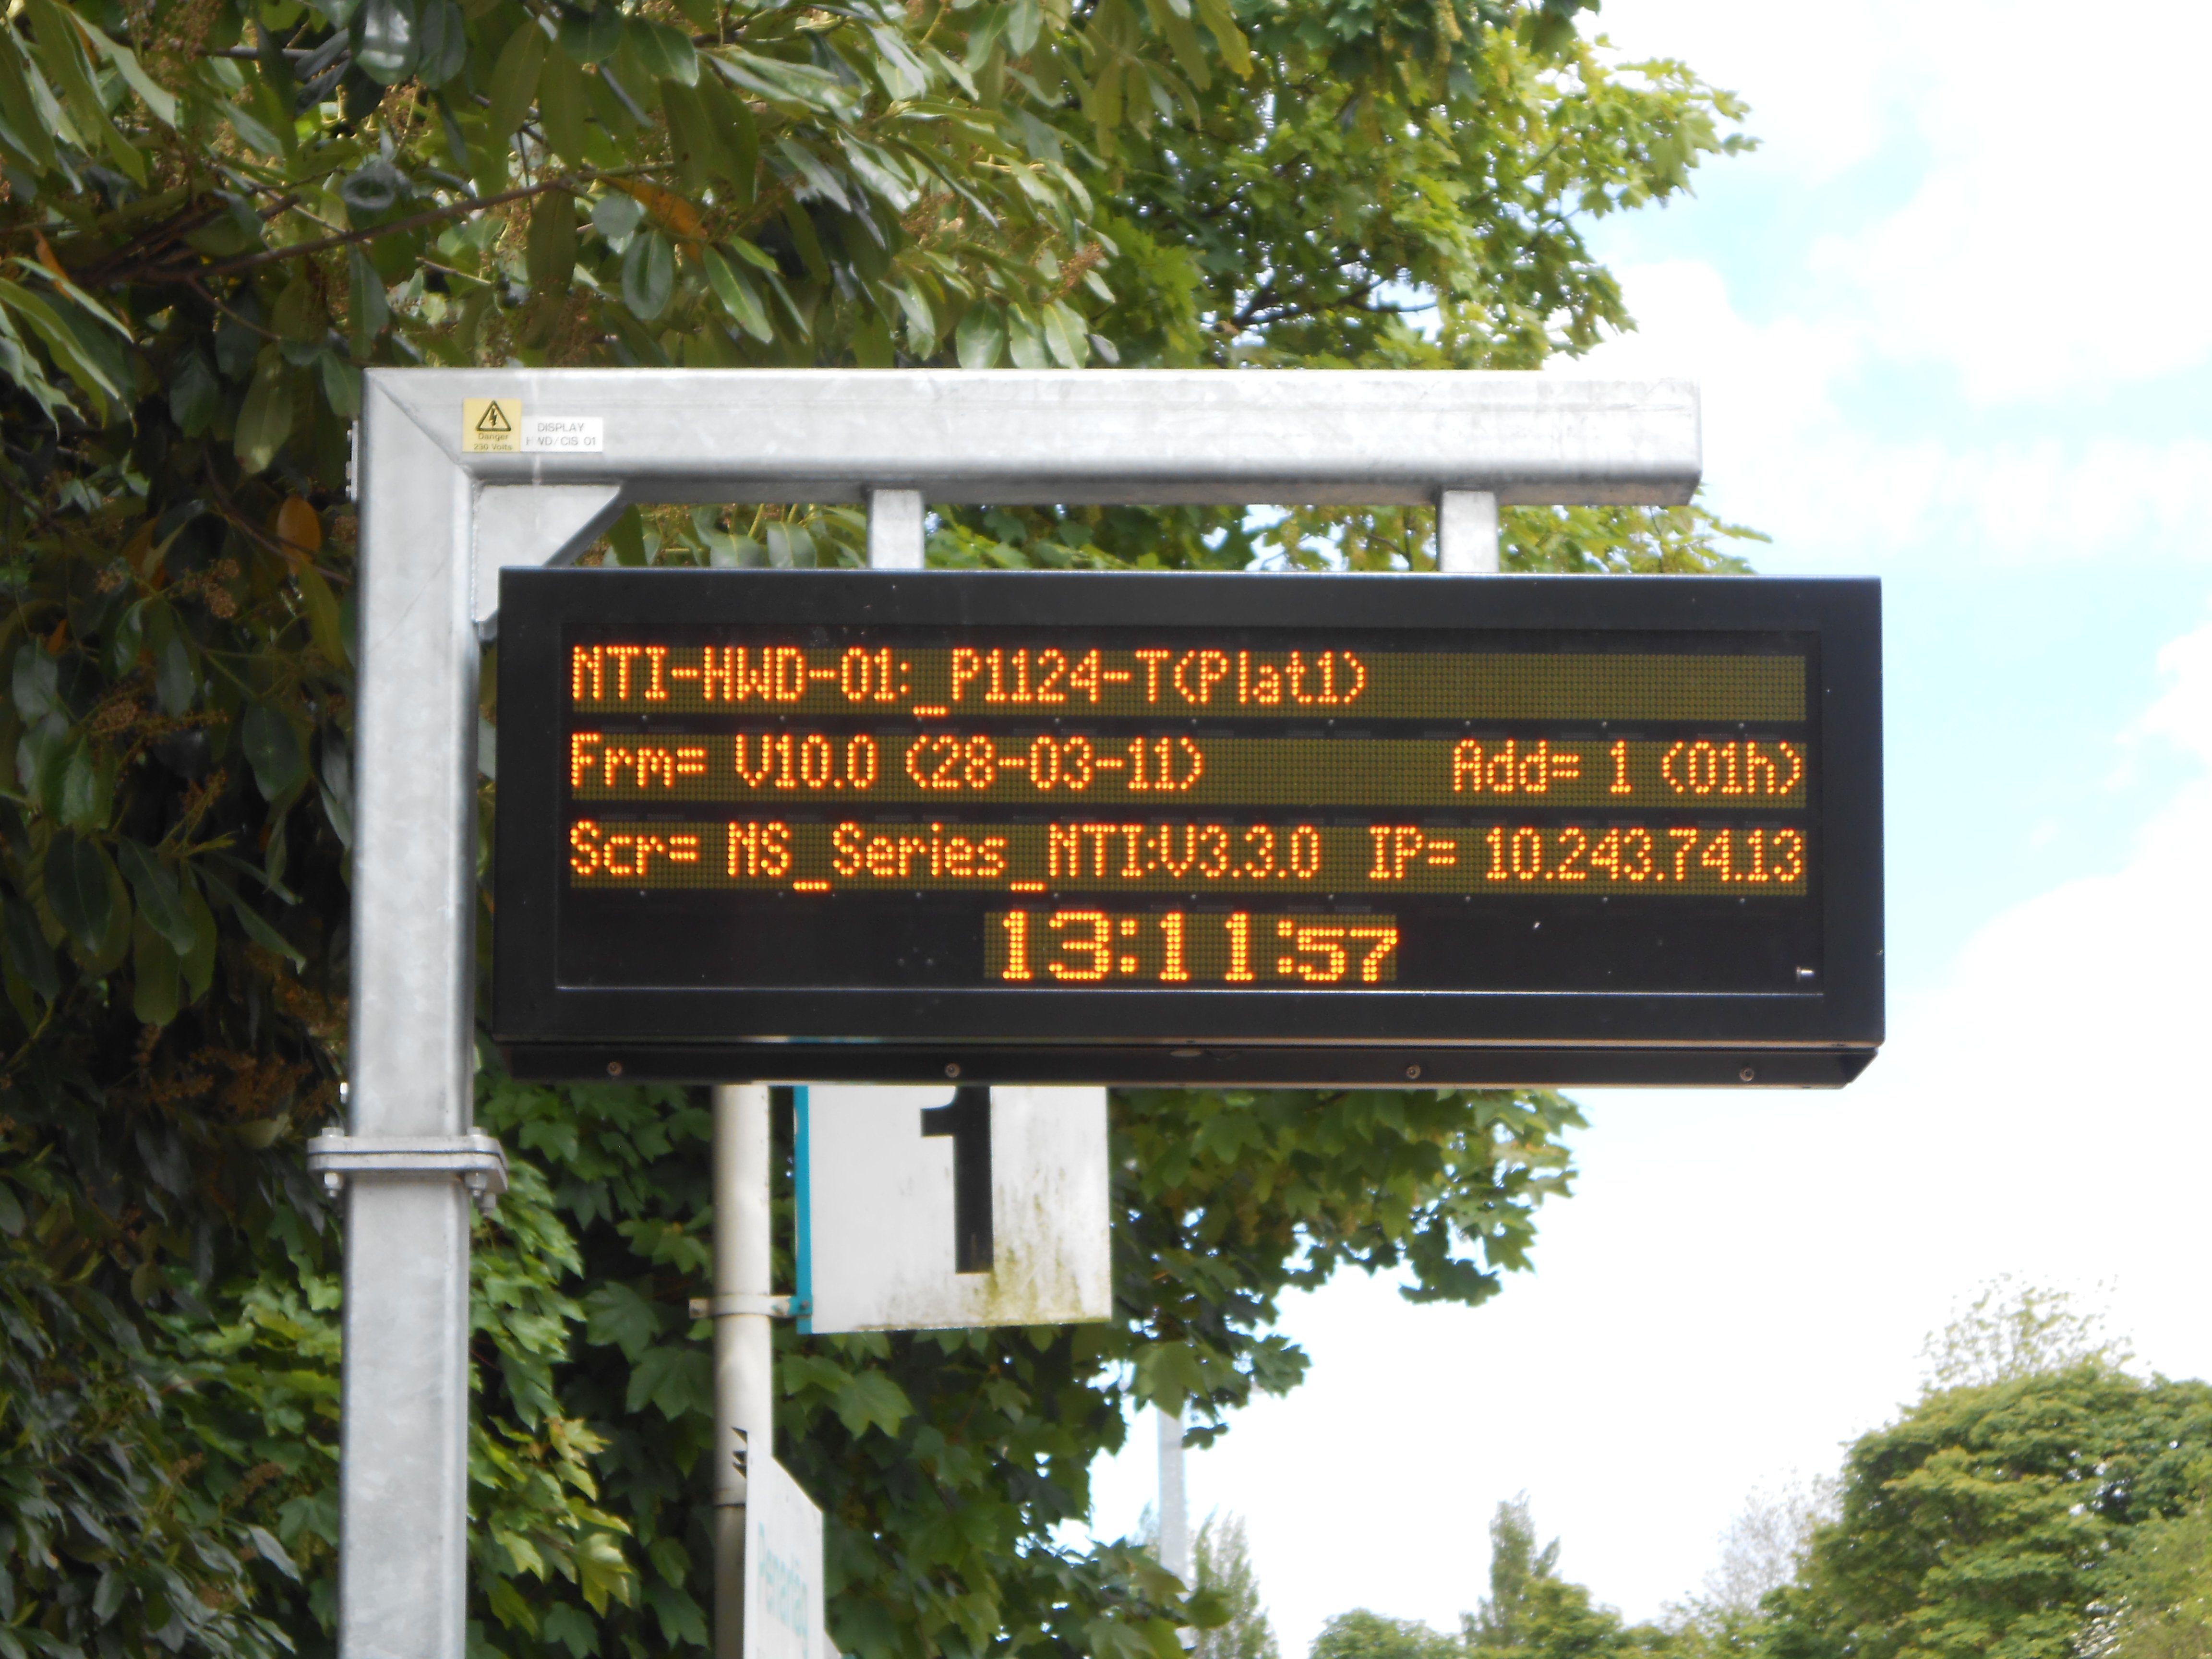 Photo of a passenger information display with diagnostic data, including an IP address, taken at Hawarden railway station, Flintshire, Wales. CC-BY-SA 3.0 Rept0n1x.